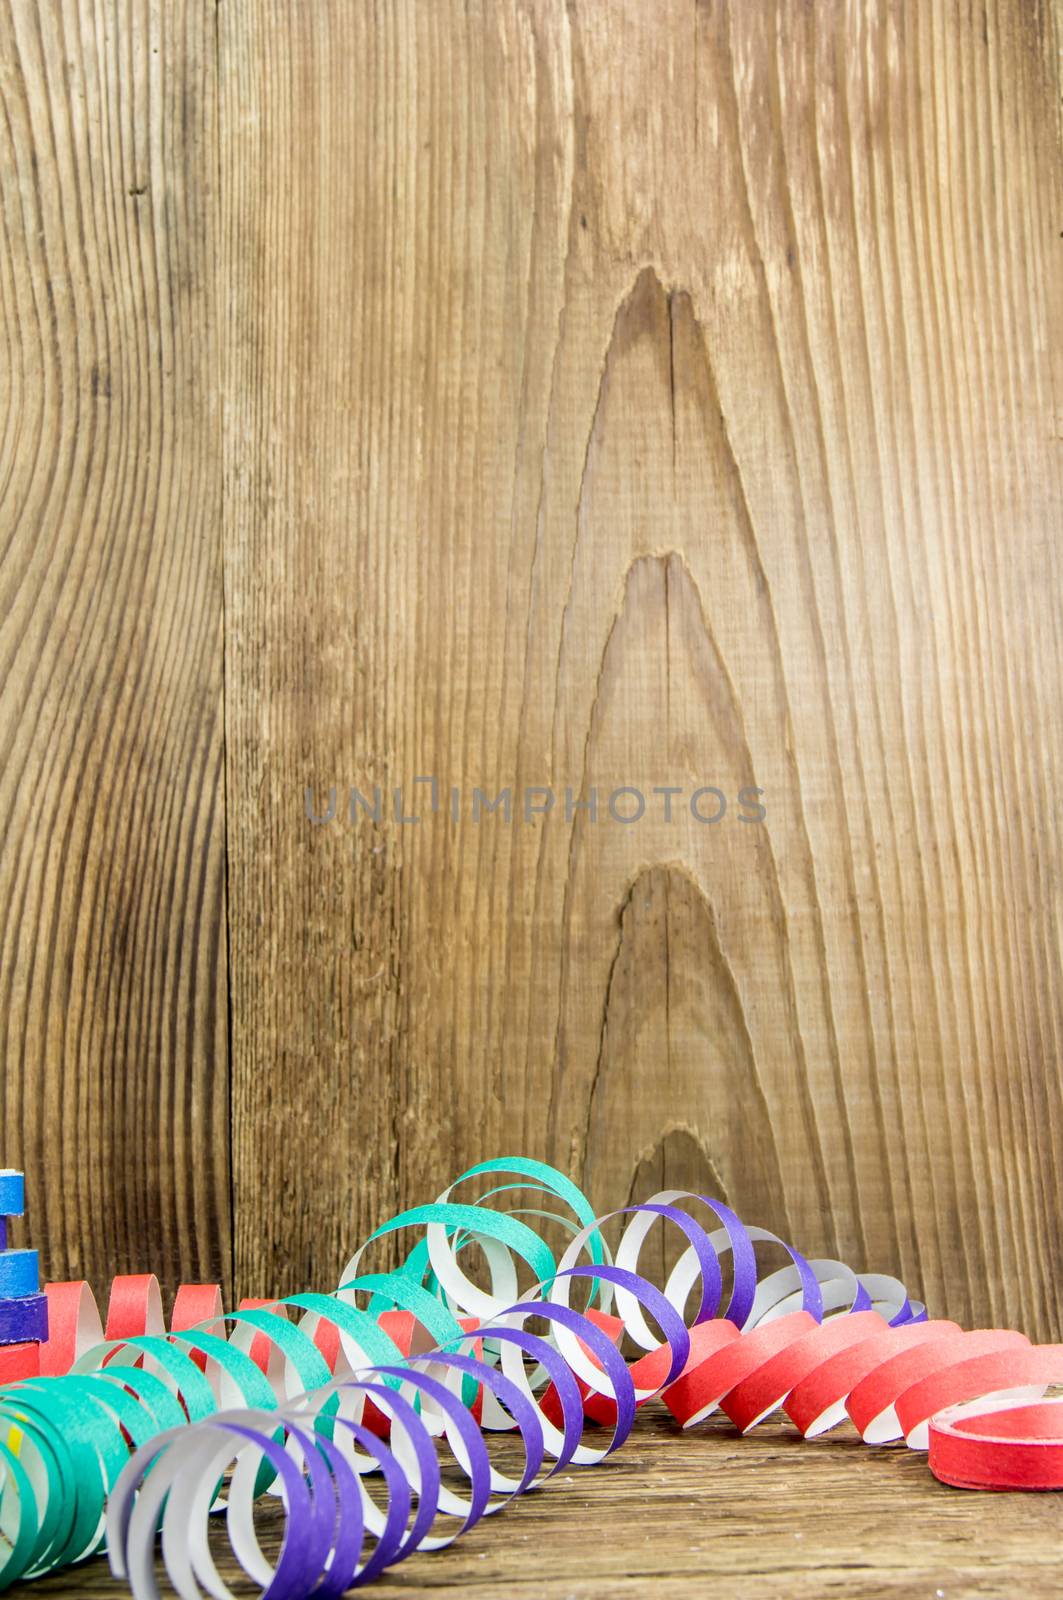 Bright christmas composition on wooden background. For your commercial and editorial use.